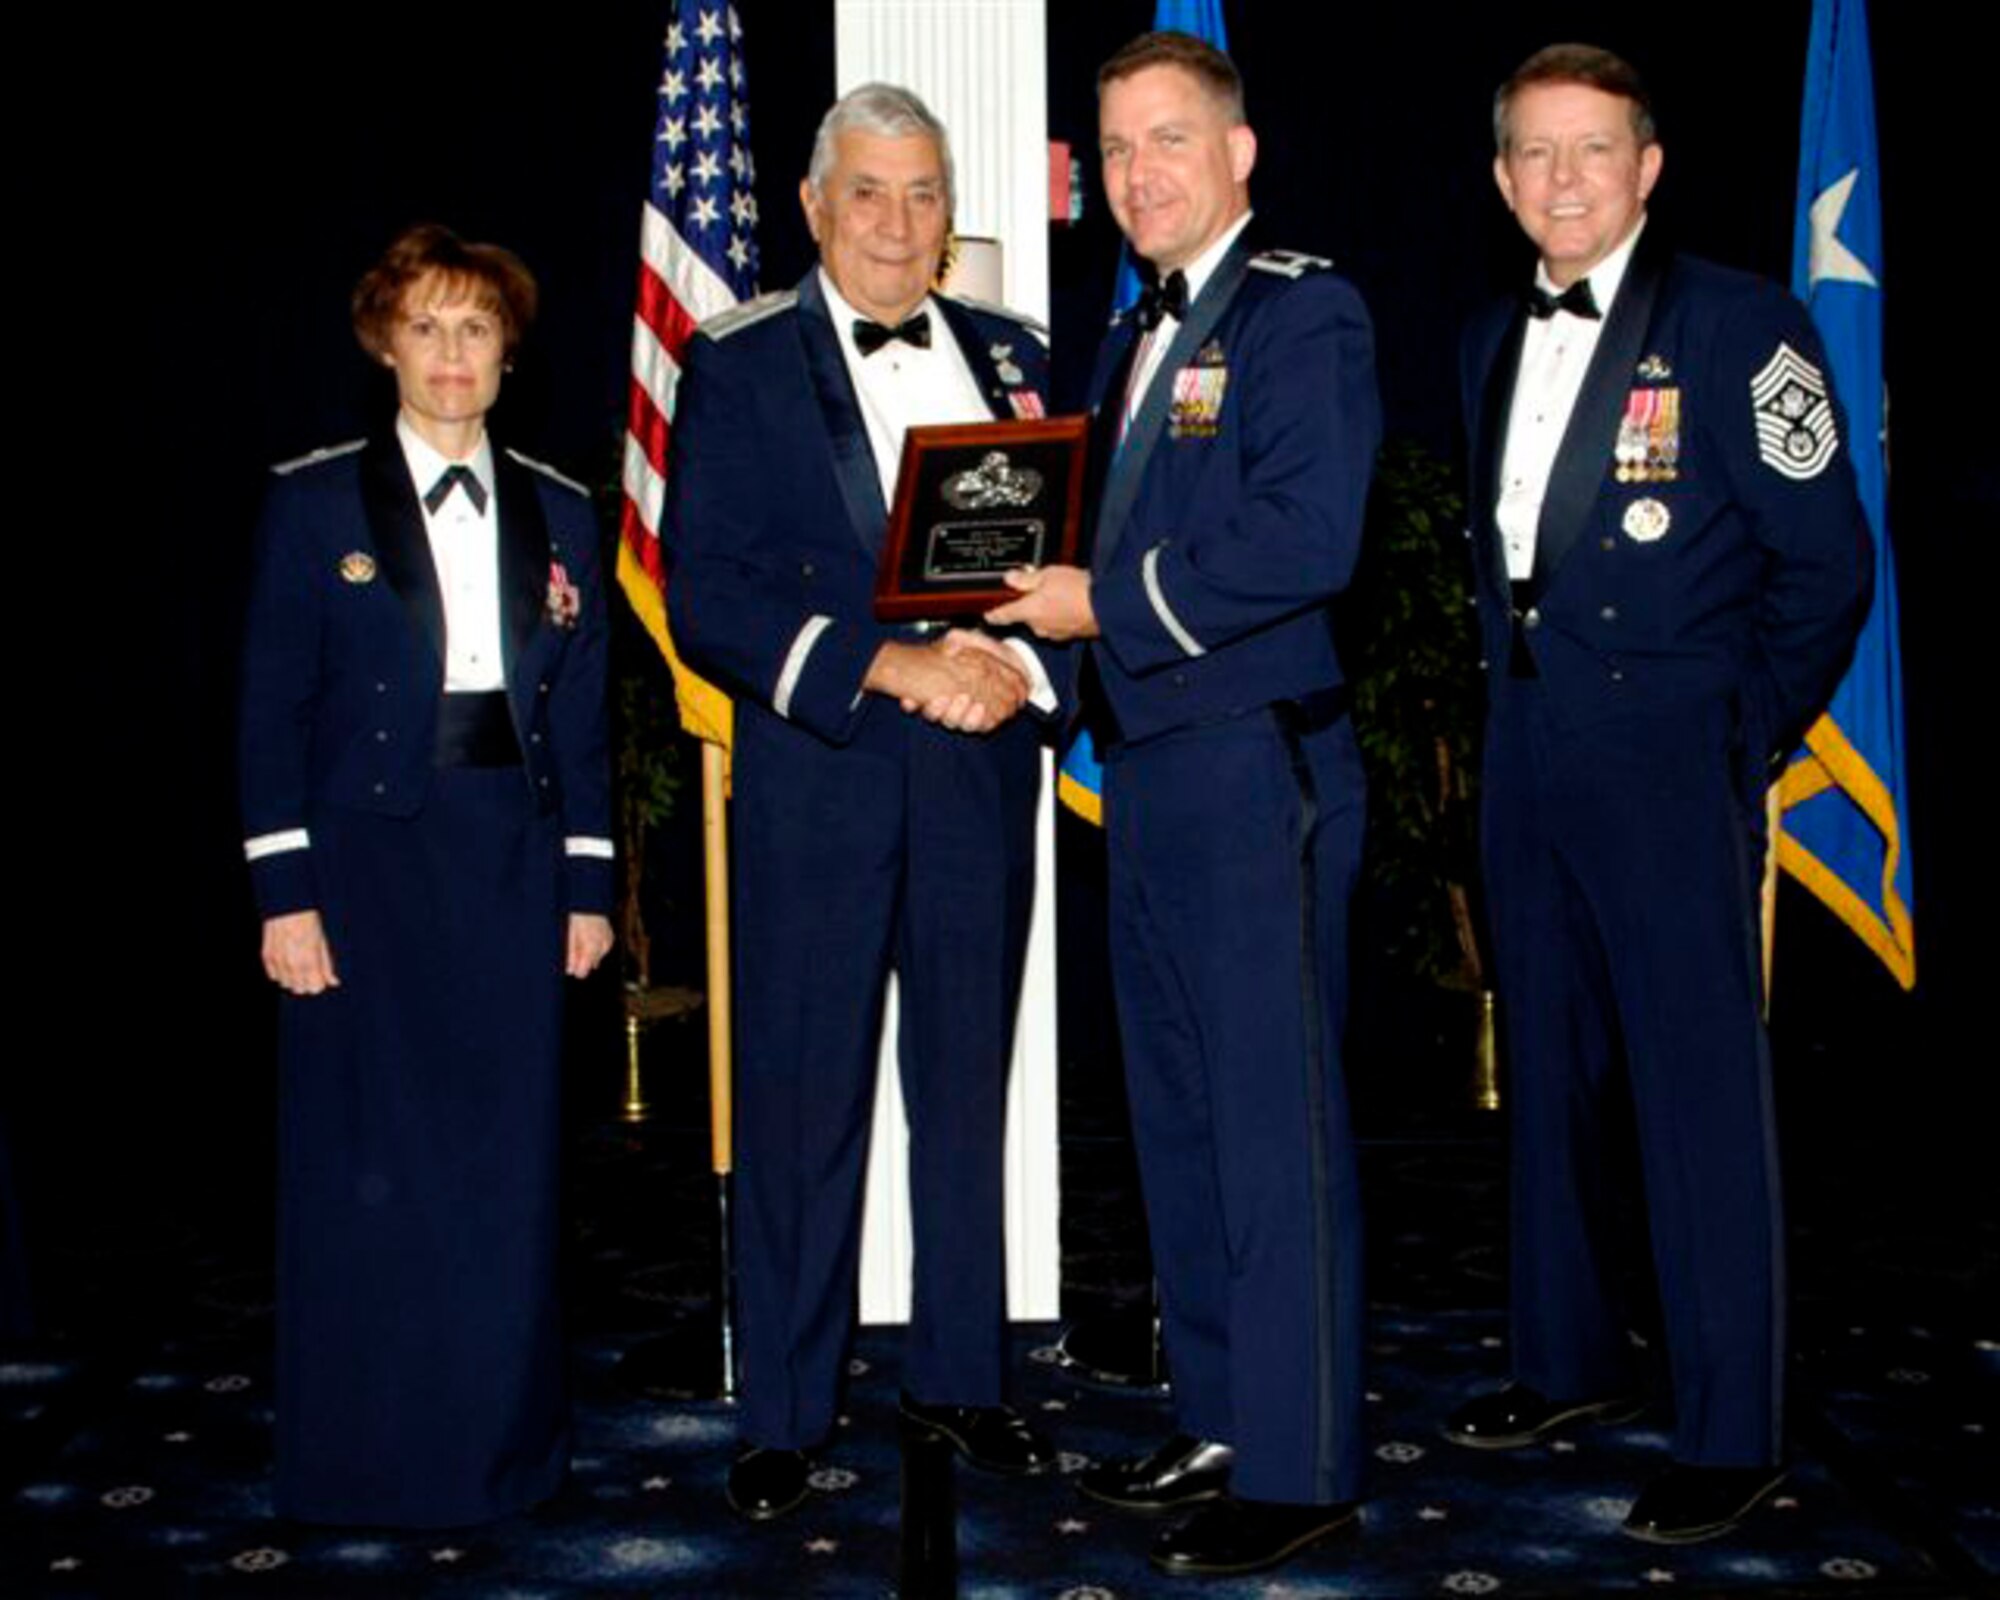 Brig. Gen. Kathleen Close, retired Lt. Gen. Leo Marquez, Lt. Col. Leif Johnson and Chief Master Sgt. of the Air Force Rodney McKinley gather in a ceremony on Bolling Air Force Base, Washington D.C., as Colonel Johnson is presented with the 2006 Lt. Gen. Leo Marquez Award by General Marquez